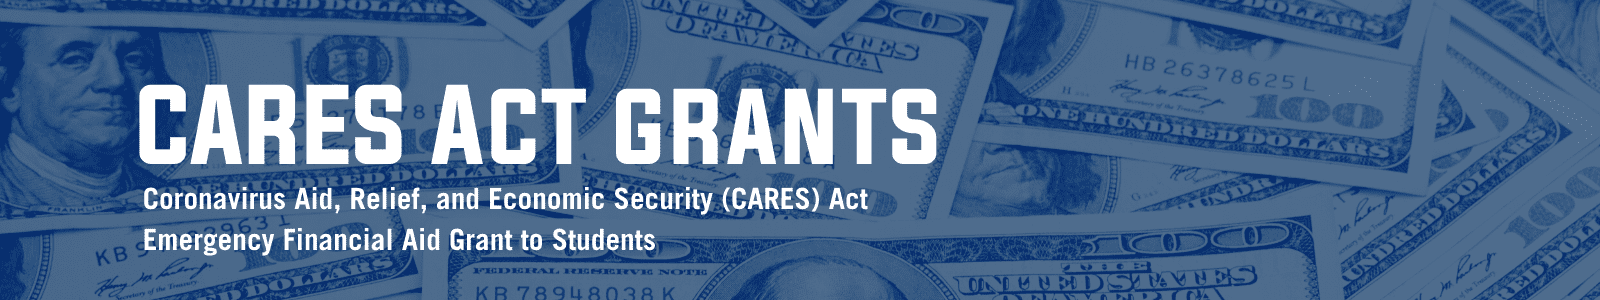 Cares Act Grants banner